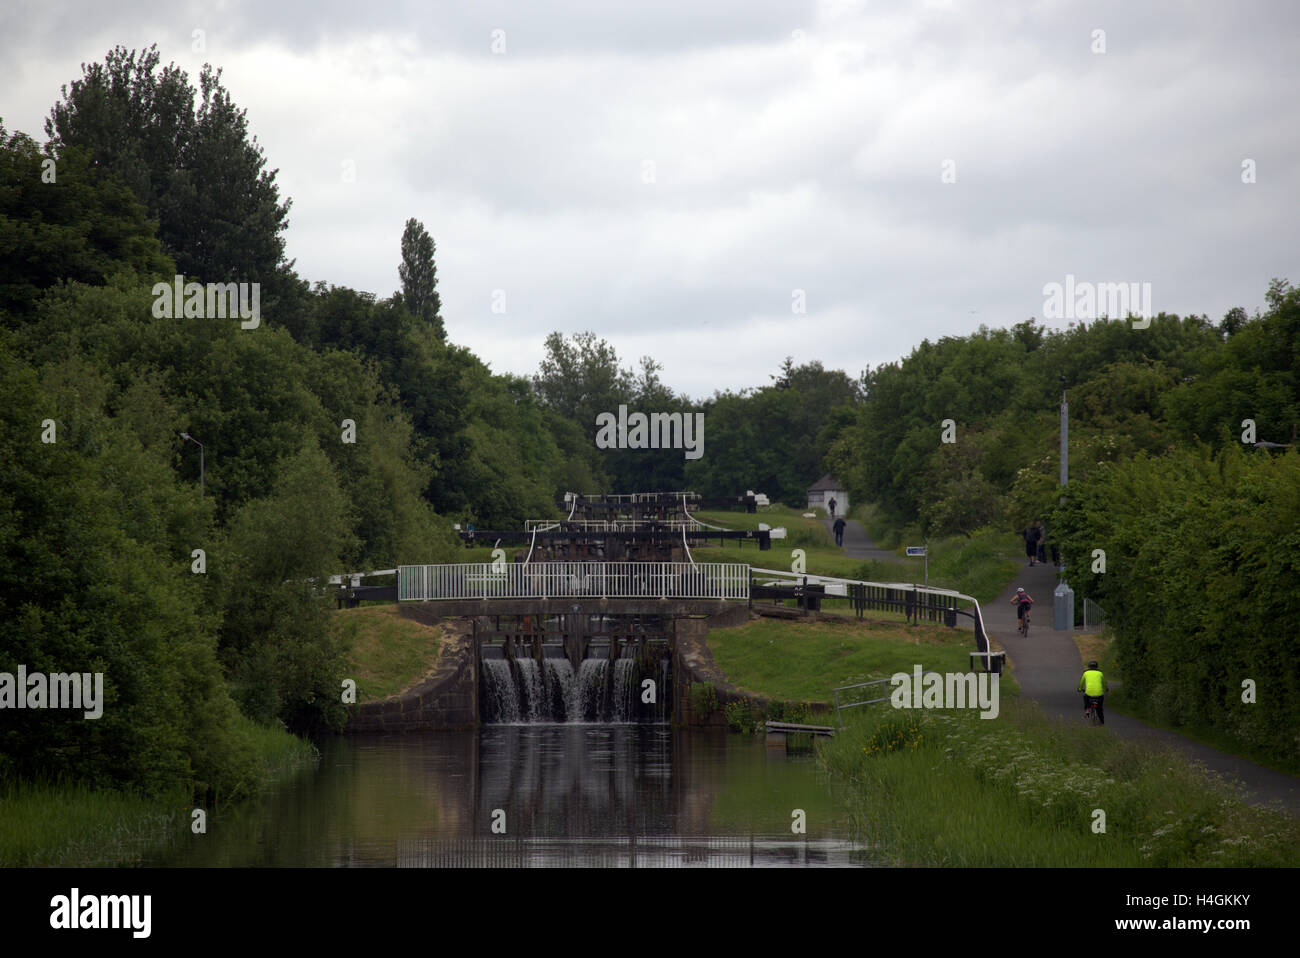 Forth and Clyde canal, Glasgow Stock Photo